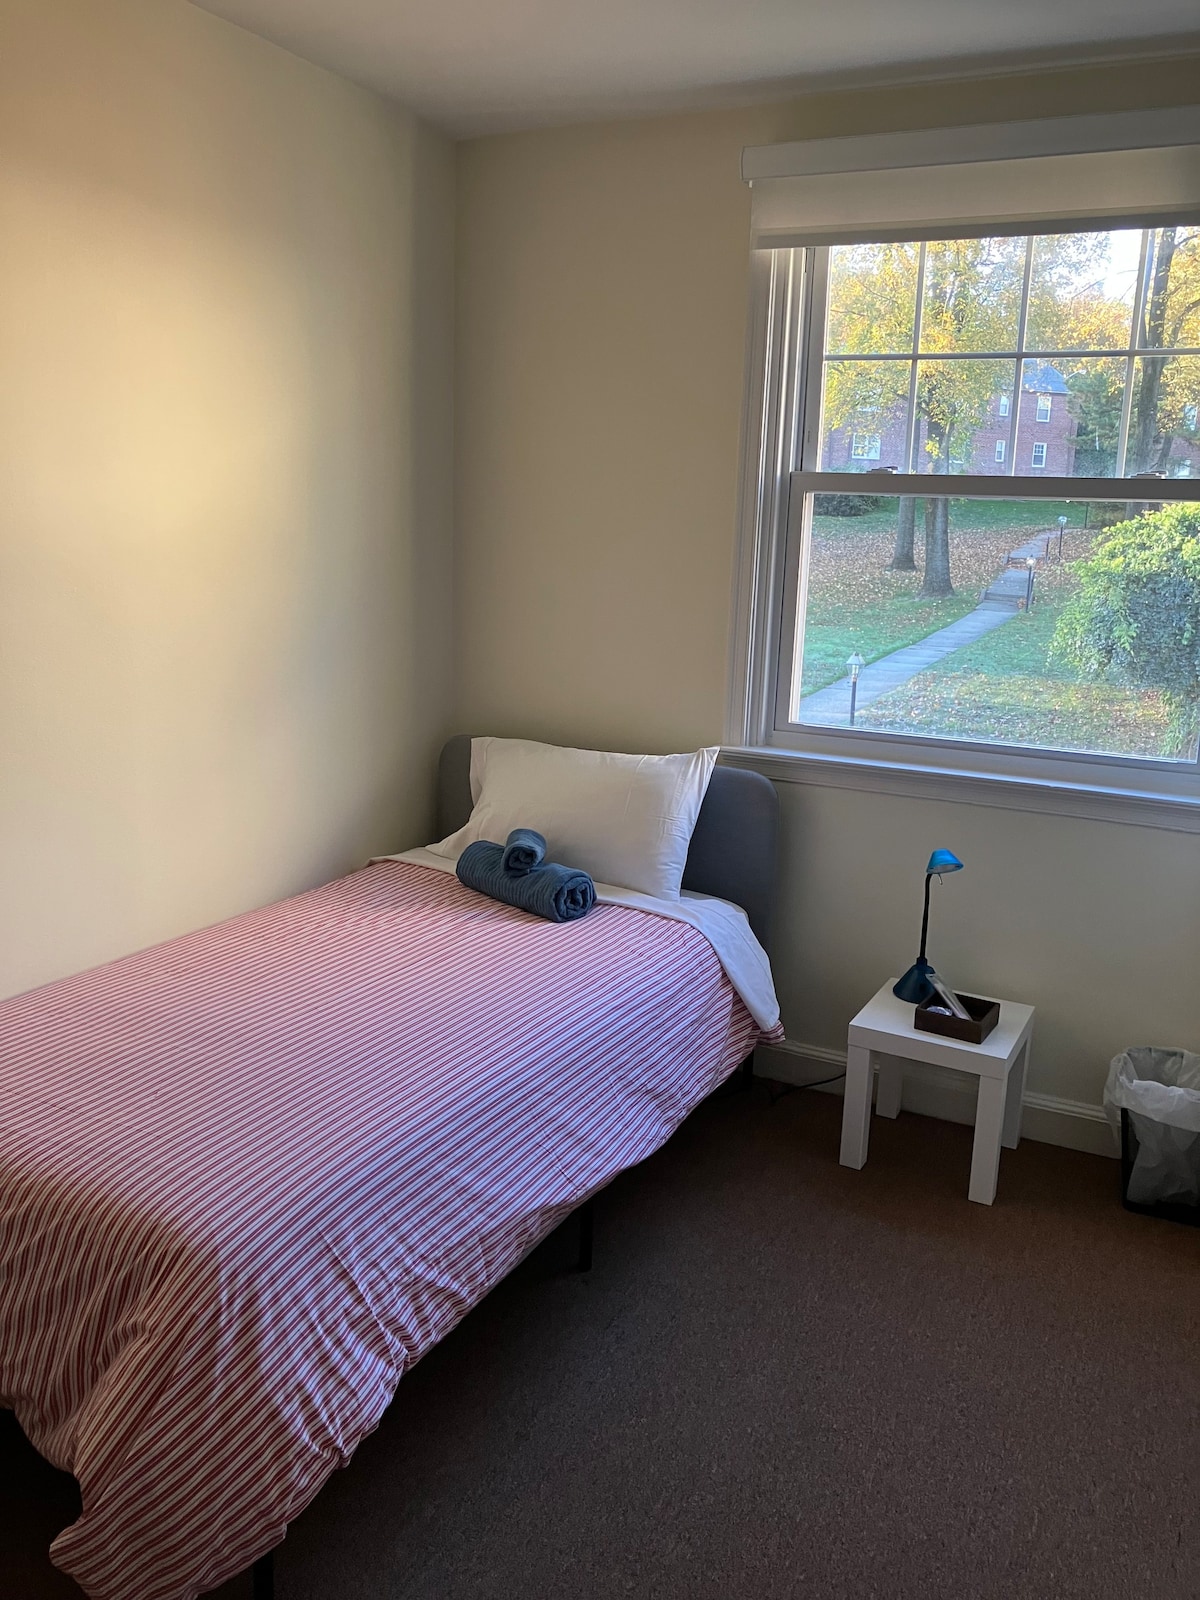 Spacious bedroom in Wayne, PA, close to colleges